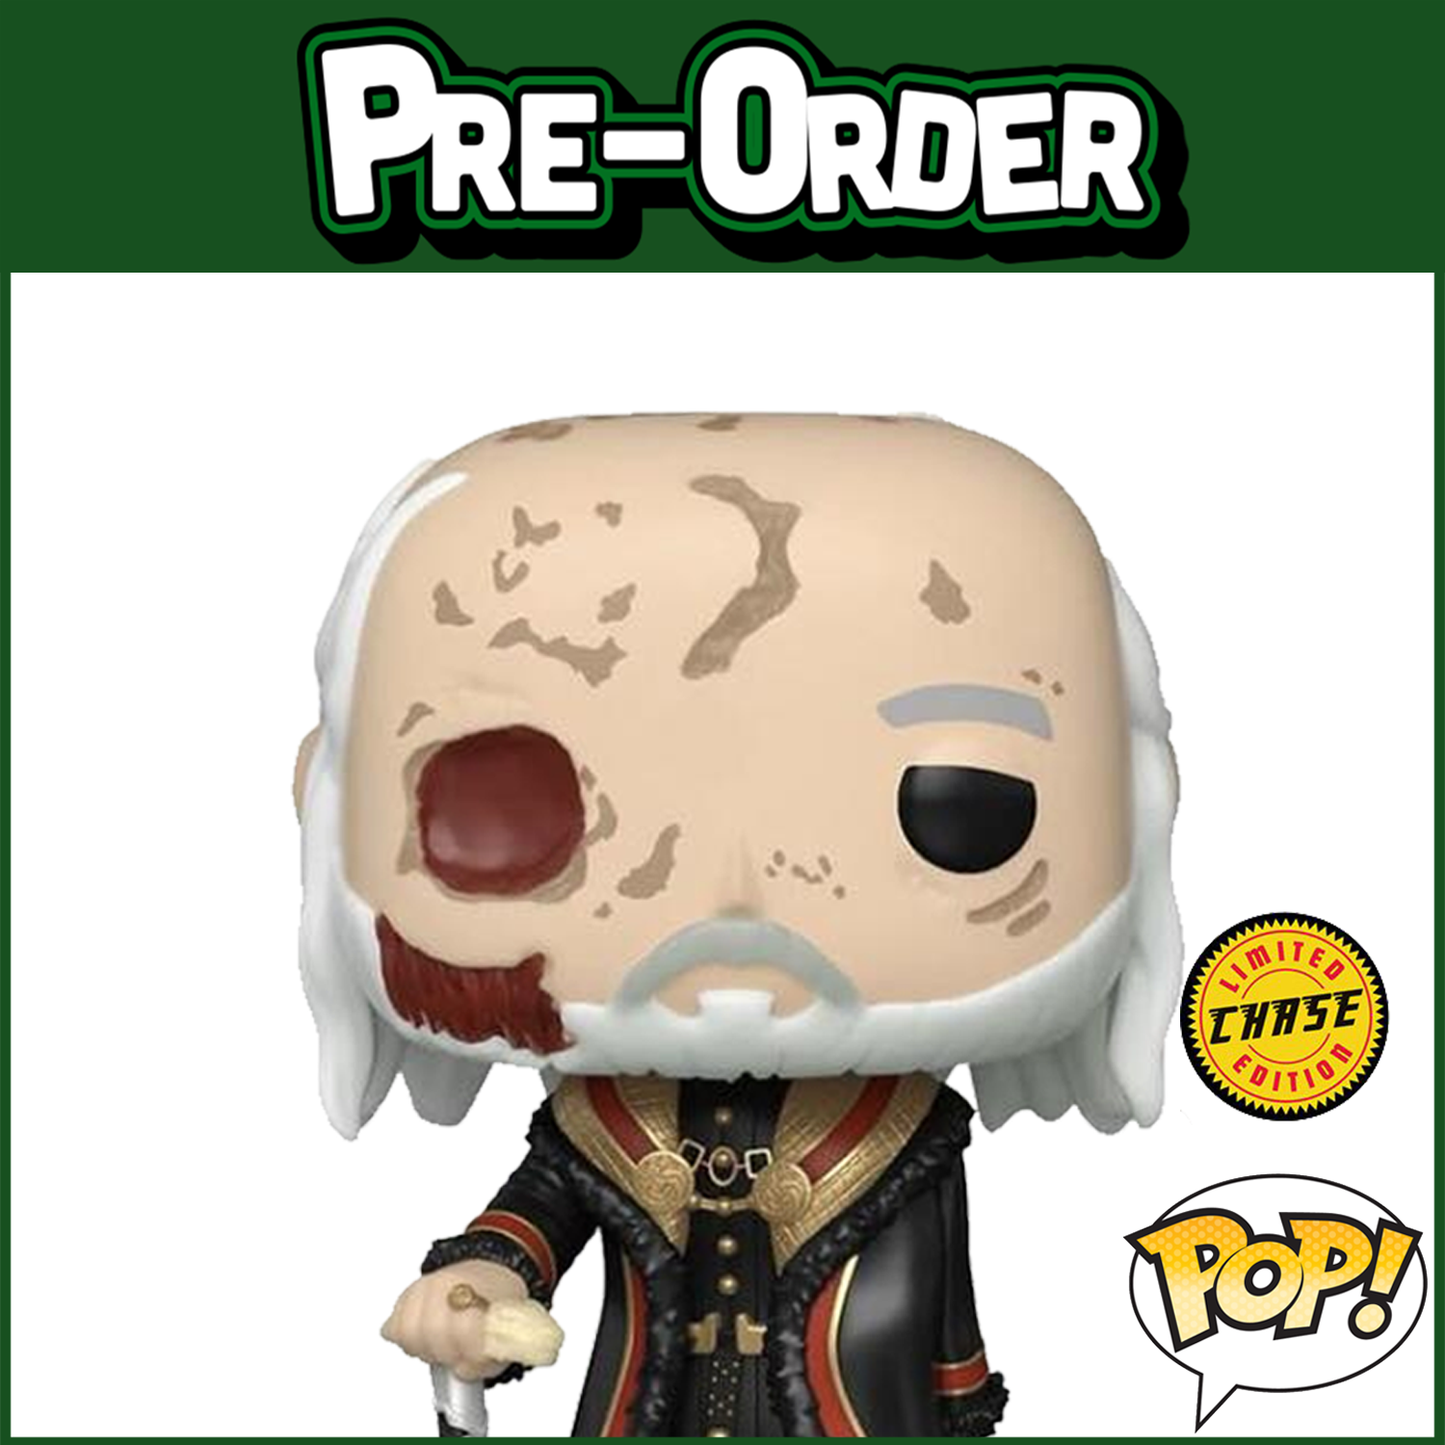 (PRE-ORDER) Funko POP! Television: House of the Dragon - Masked Viserys CHASE #15